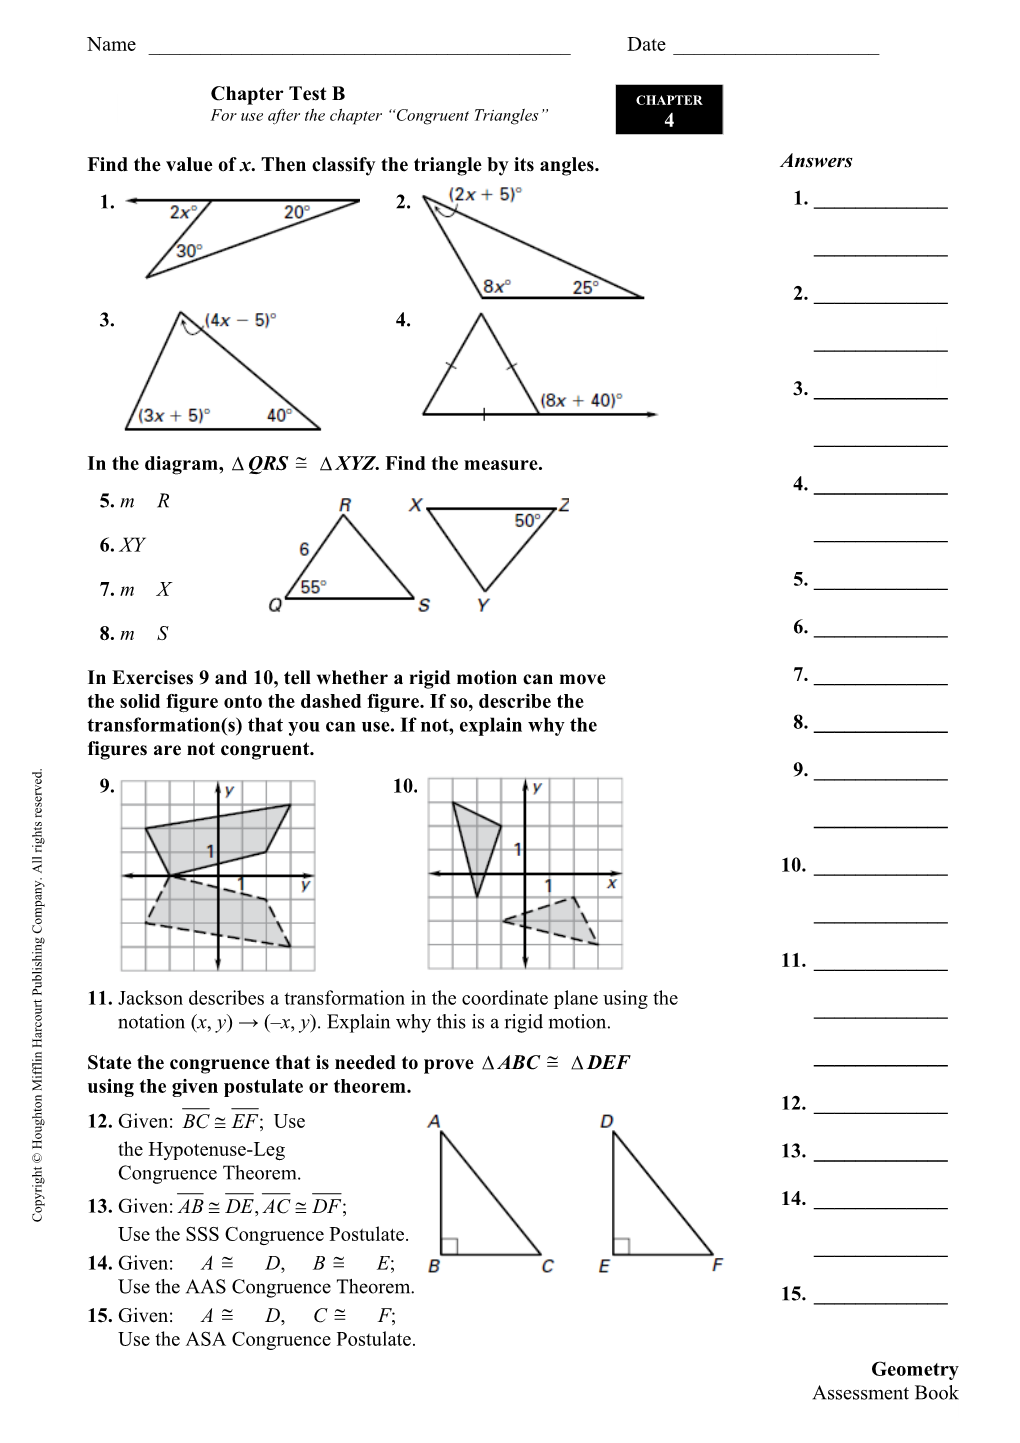 For Use After the Chapter Congruent Triangles